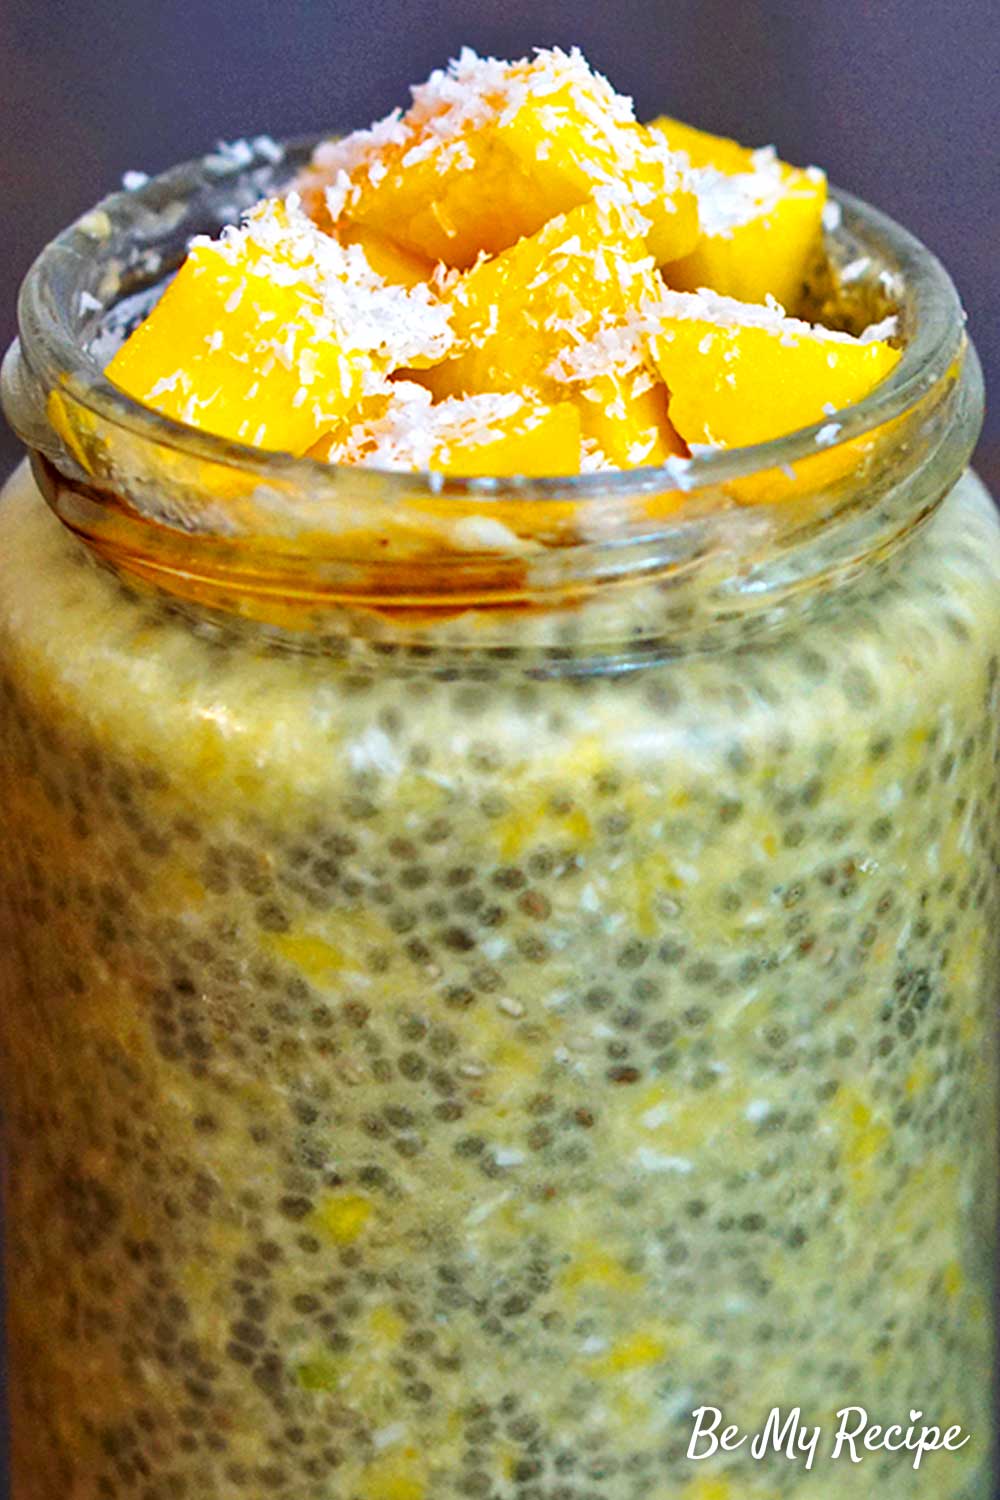 Mango Coconut Chia Pudding Recipe That’s Loaded with Sweet and Creamy Goodness